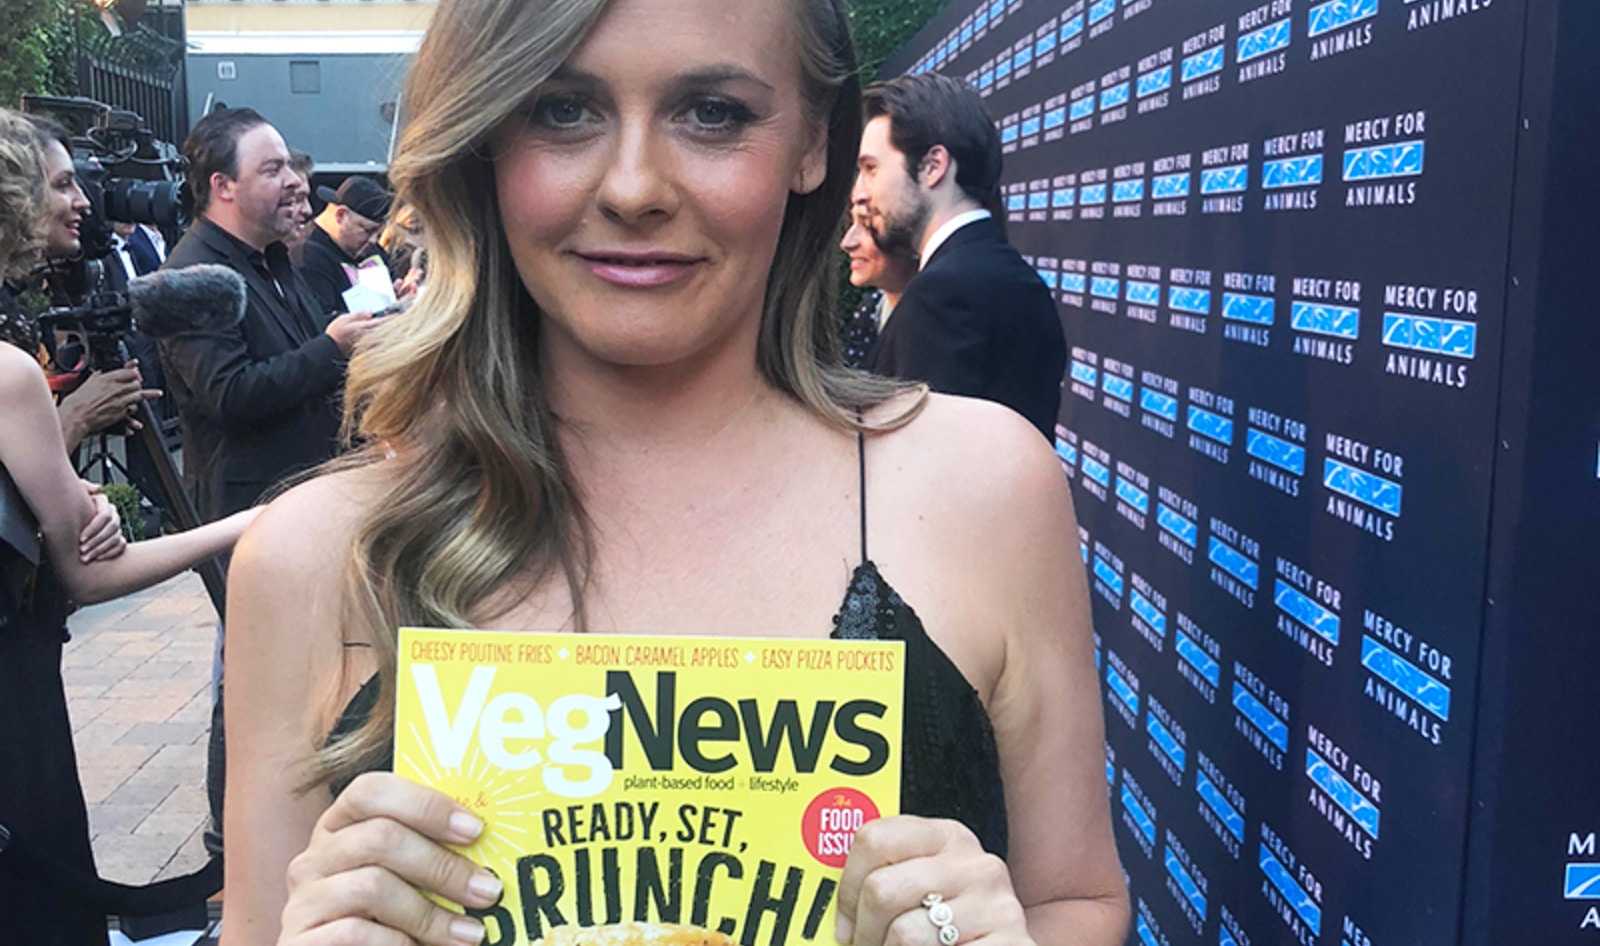 Alicia Silverstone Honored with Animal Hero Award at Celebrity-Packed Vegan Gala